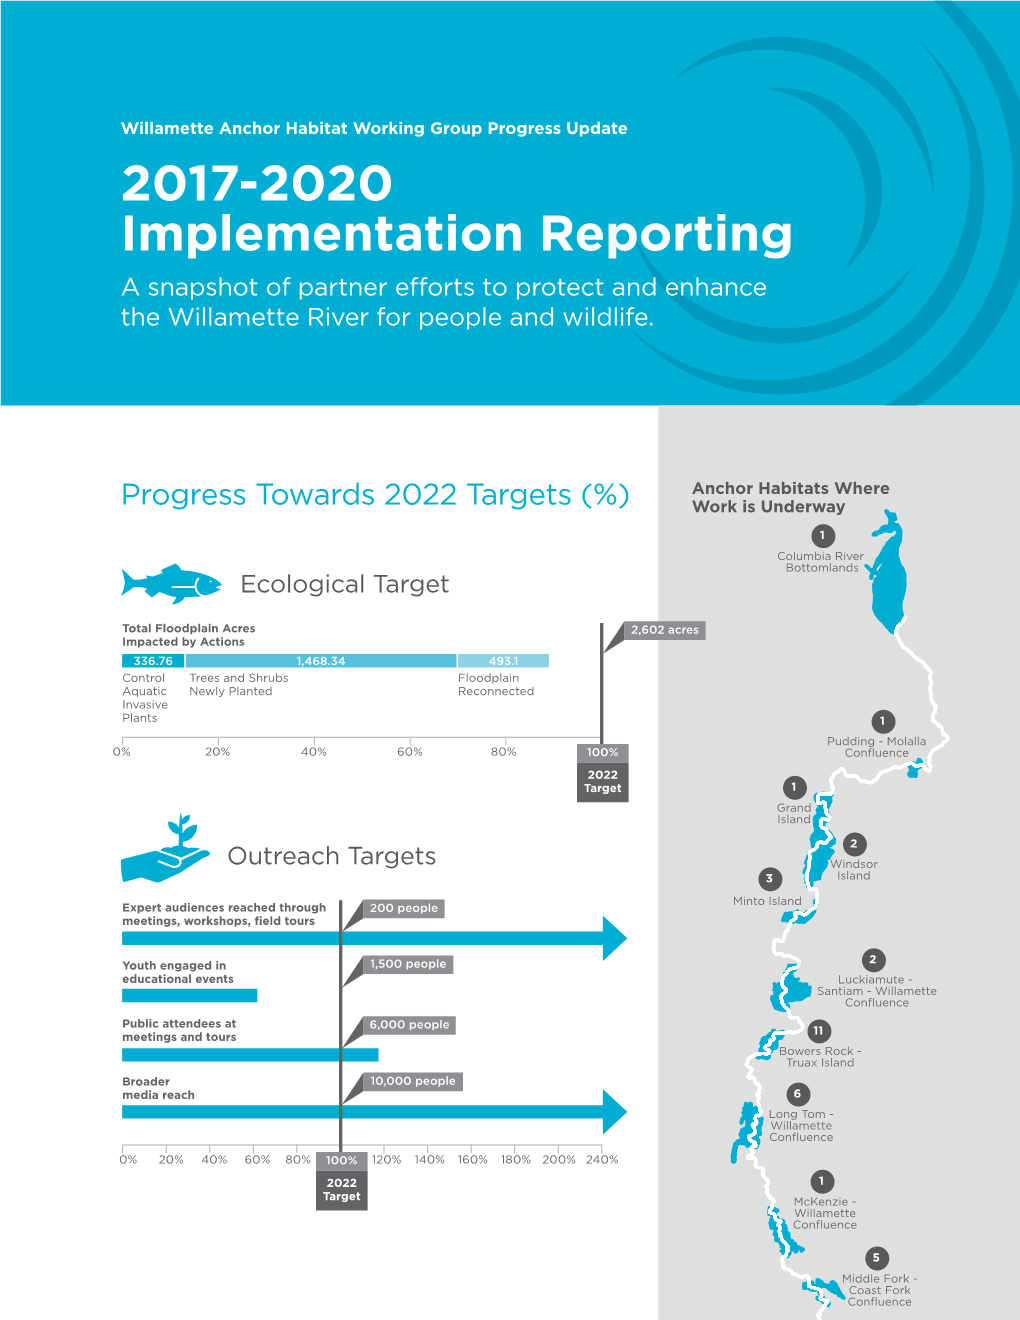 2017-2020 Implementation Reporting a Snapshot of Partner Efforts to Protect and Enhance the Willamette River for People and Wildlife